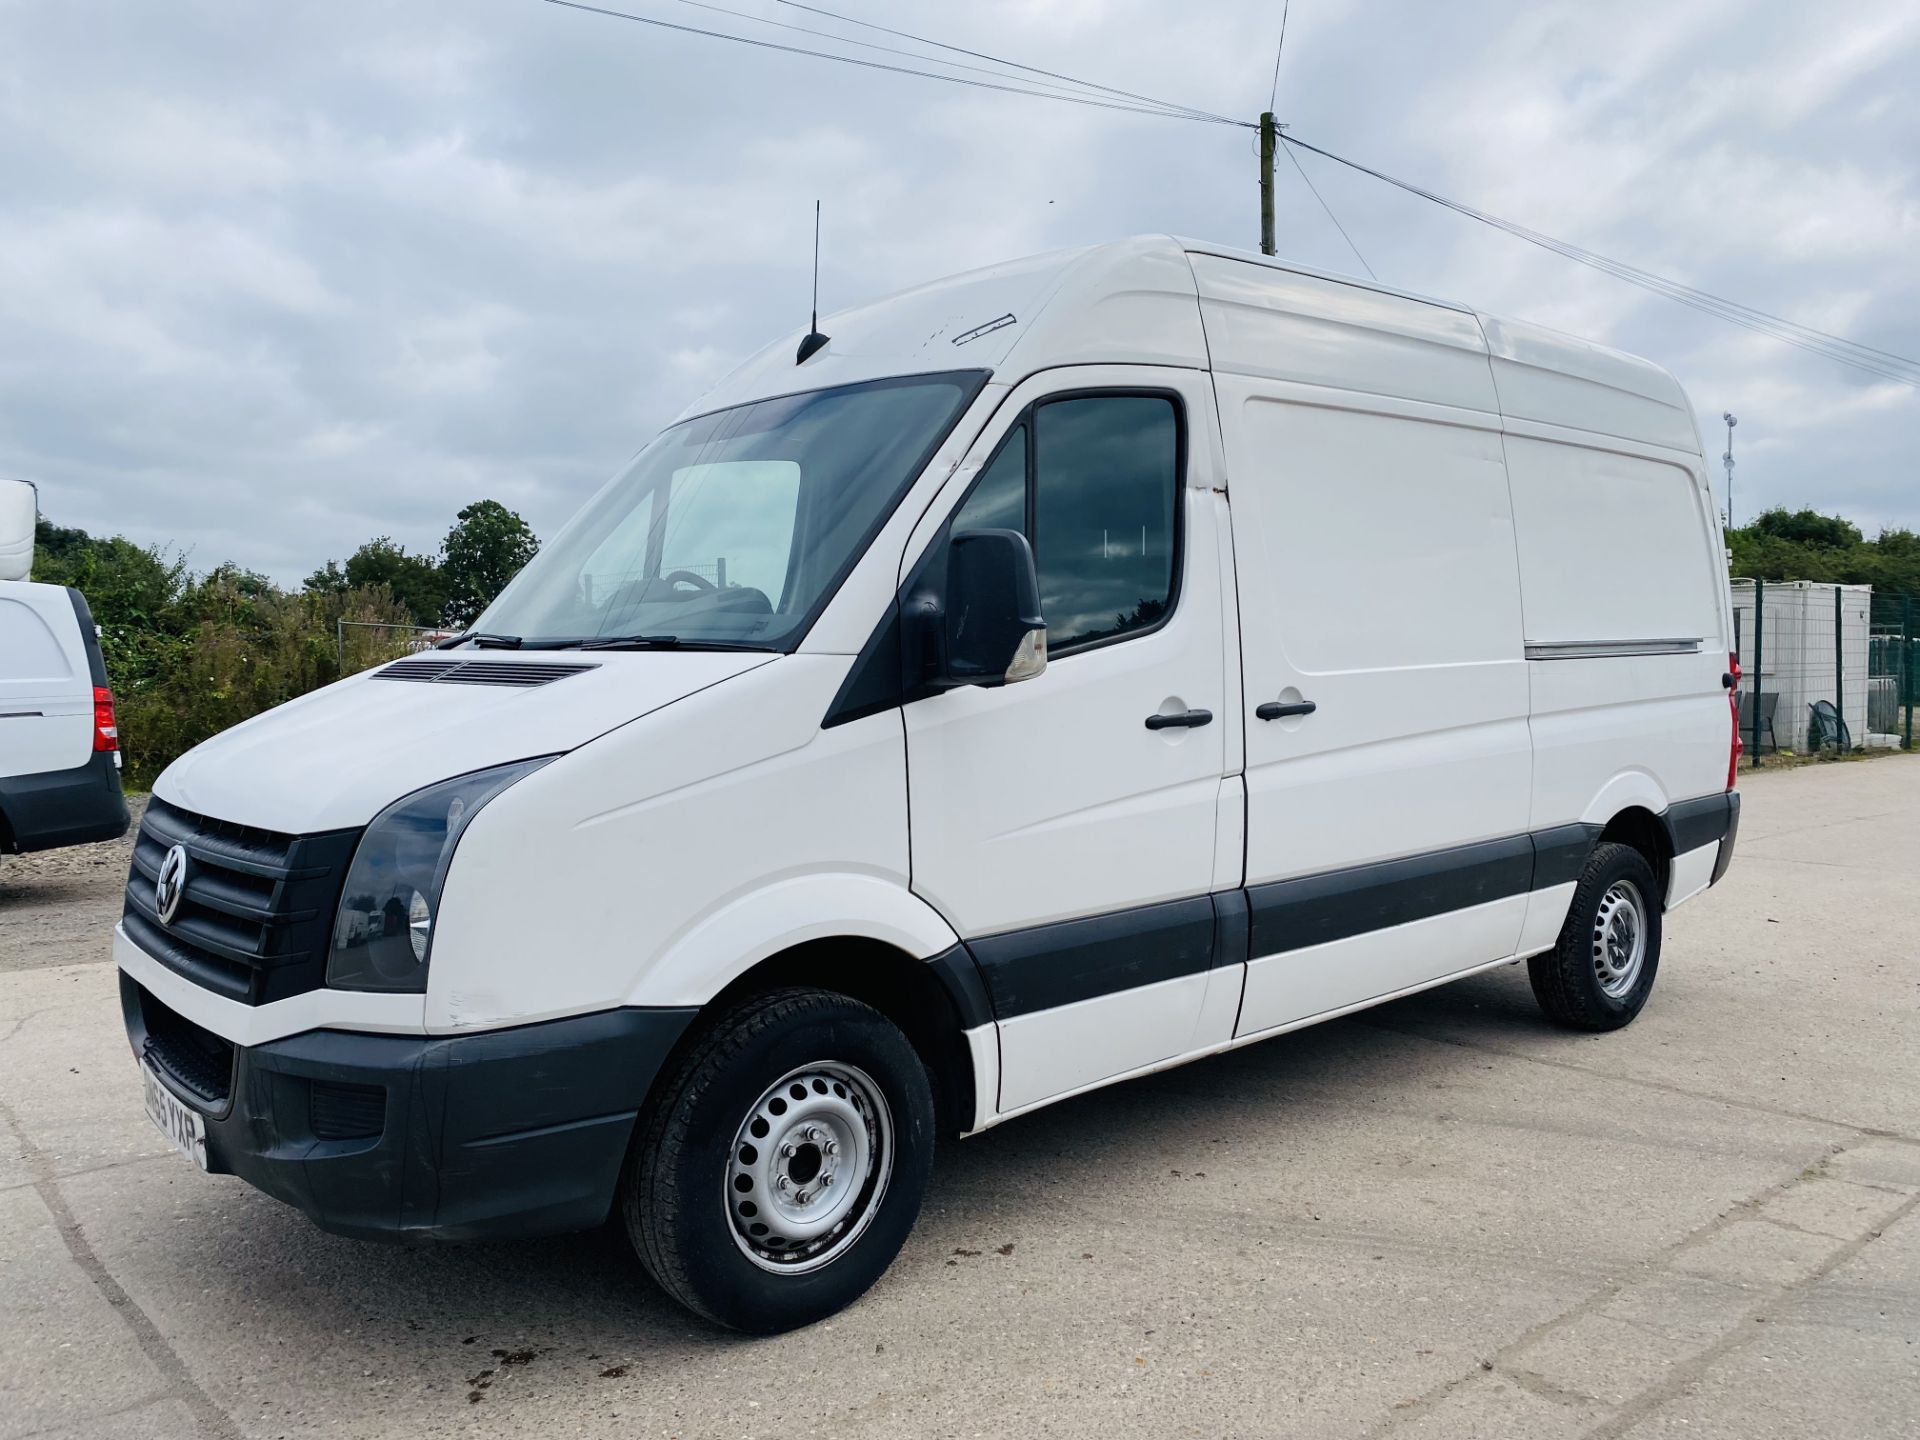 (On Sale) VOLKSWAGEN CRAFTER 2.0TDI (109) MWB HIGH ROOF - (2016 MODEL) 1 KEEPER -ONLY 104K MILES